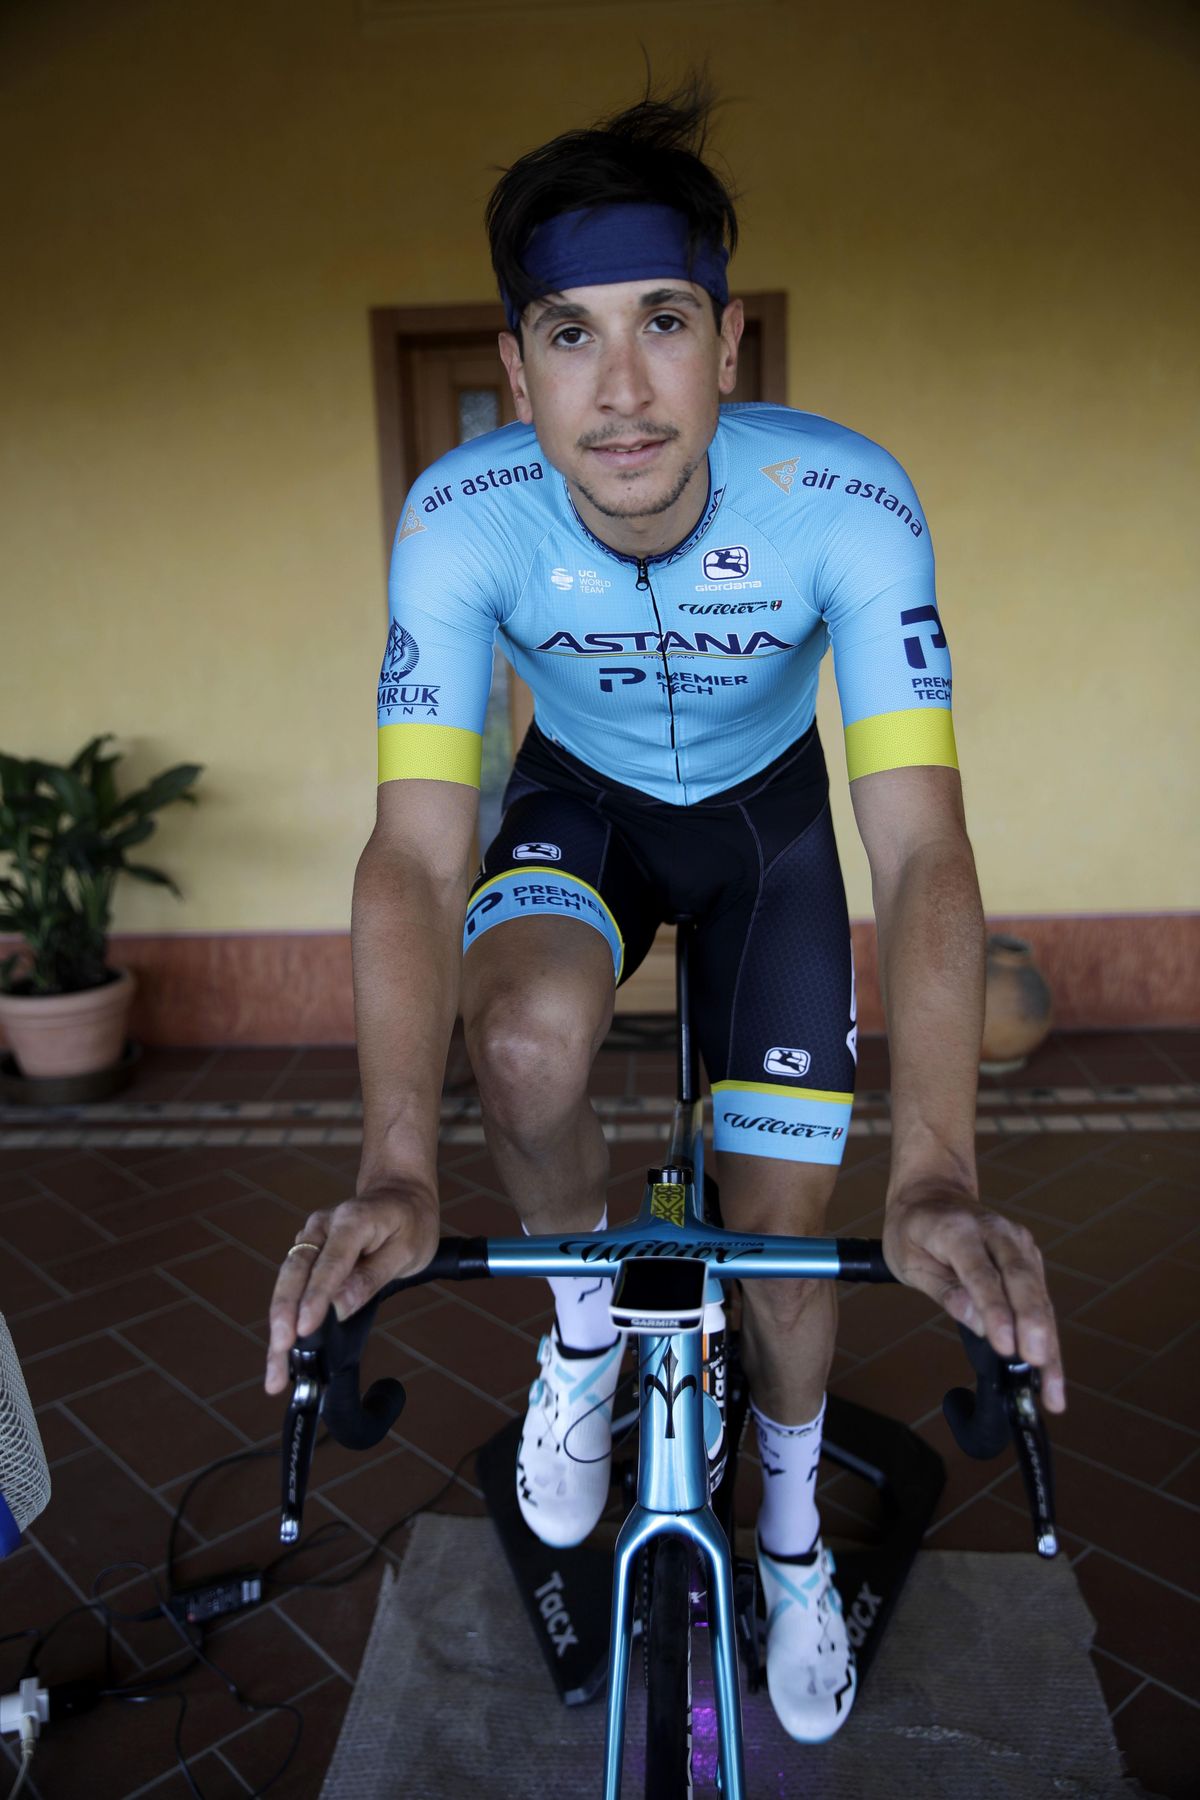 In this image taken on Tuesday, April 14, 2020, Italian professional cyclist Davide Martinelli, trains at home in Lodetto, near Brescia, Northern Italy. There are no fans lining the road. No teammates providing support. And no race to win. Professional cyclist Davide Martinelli has achieved a moral victory, though, by using his bike to help deliver medicine to elderly residents of his hometown in northern Italy during the coronavirus pandemic. (Luca Bruno / Associated Press)